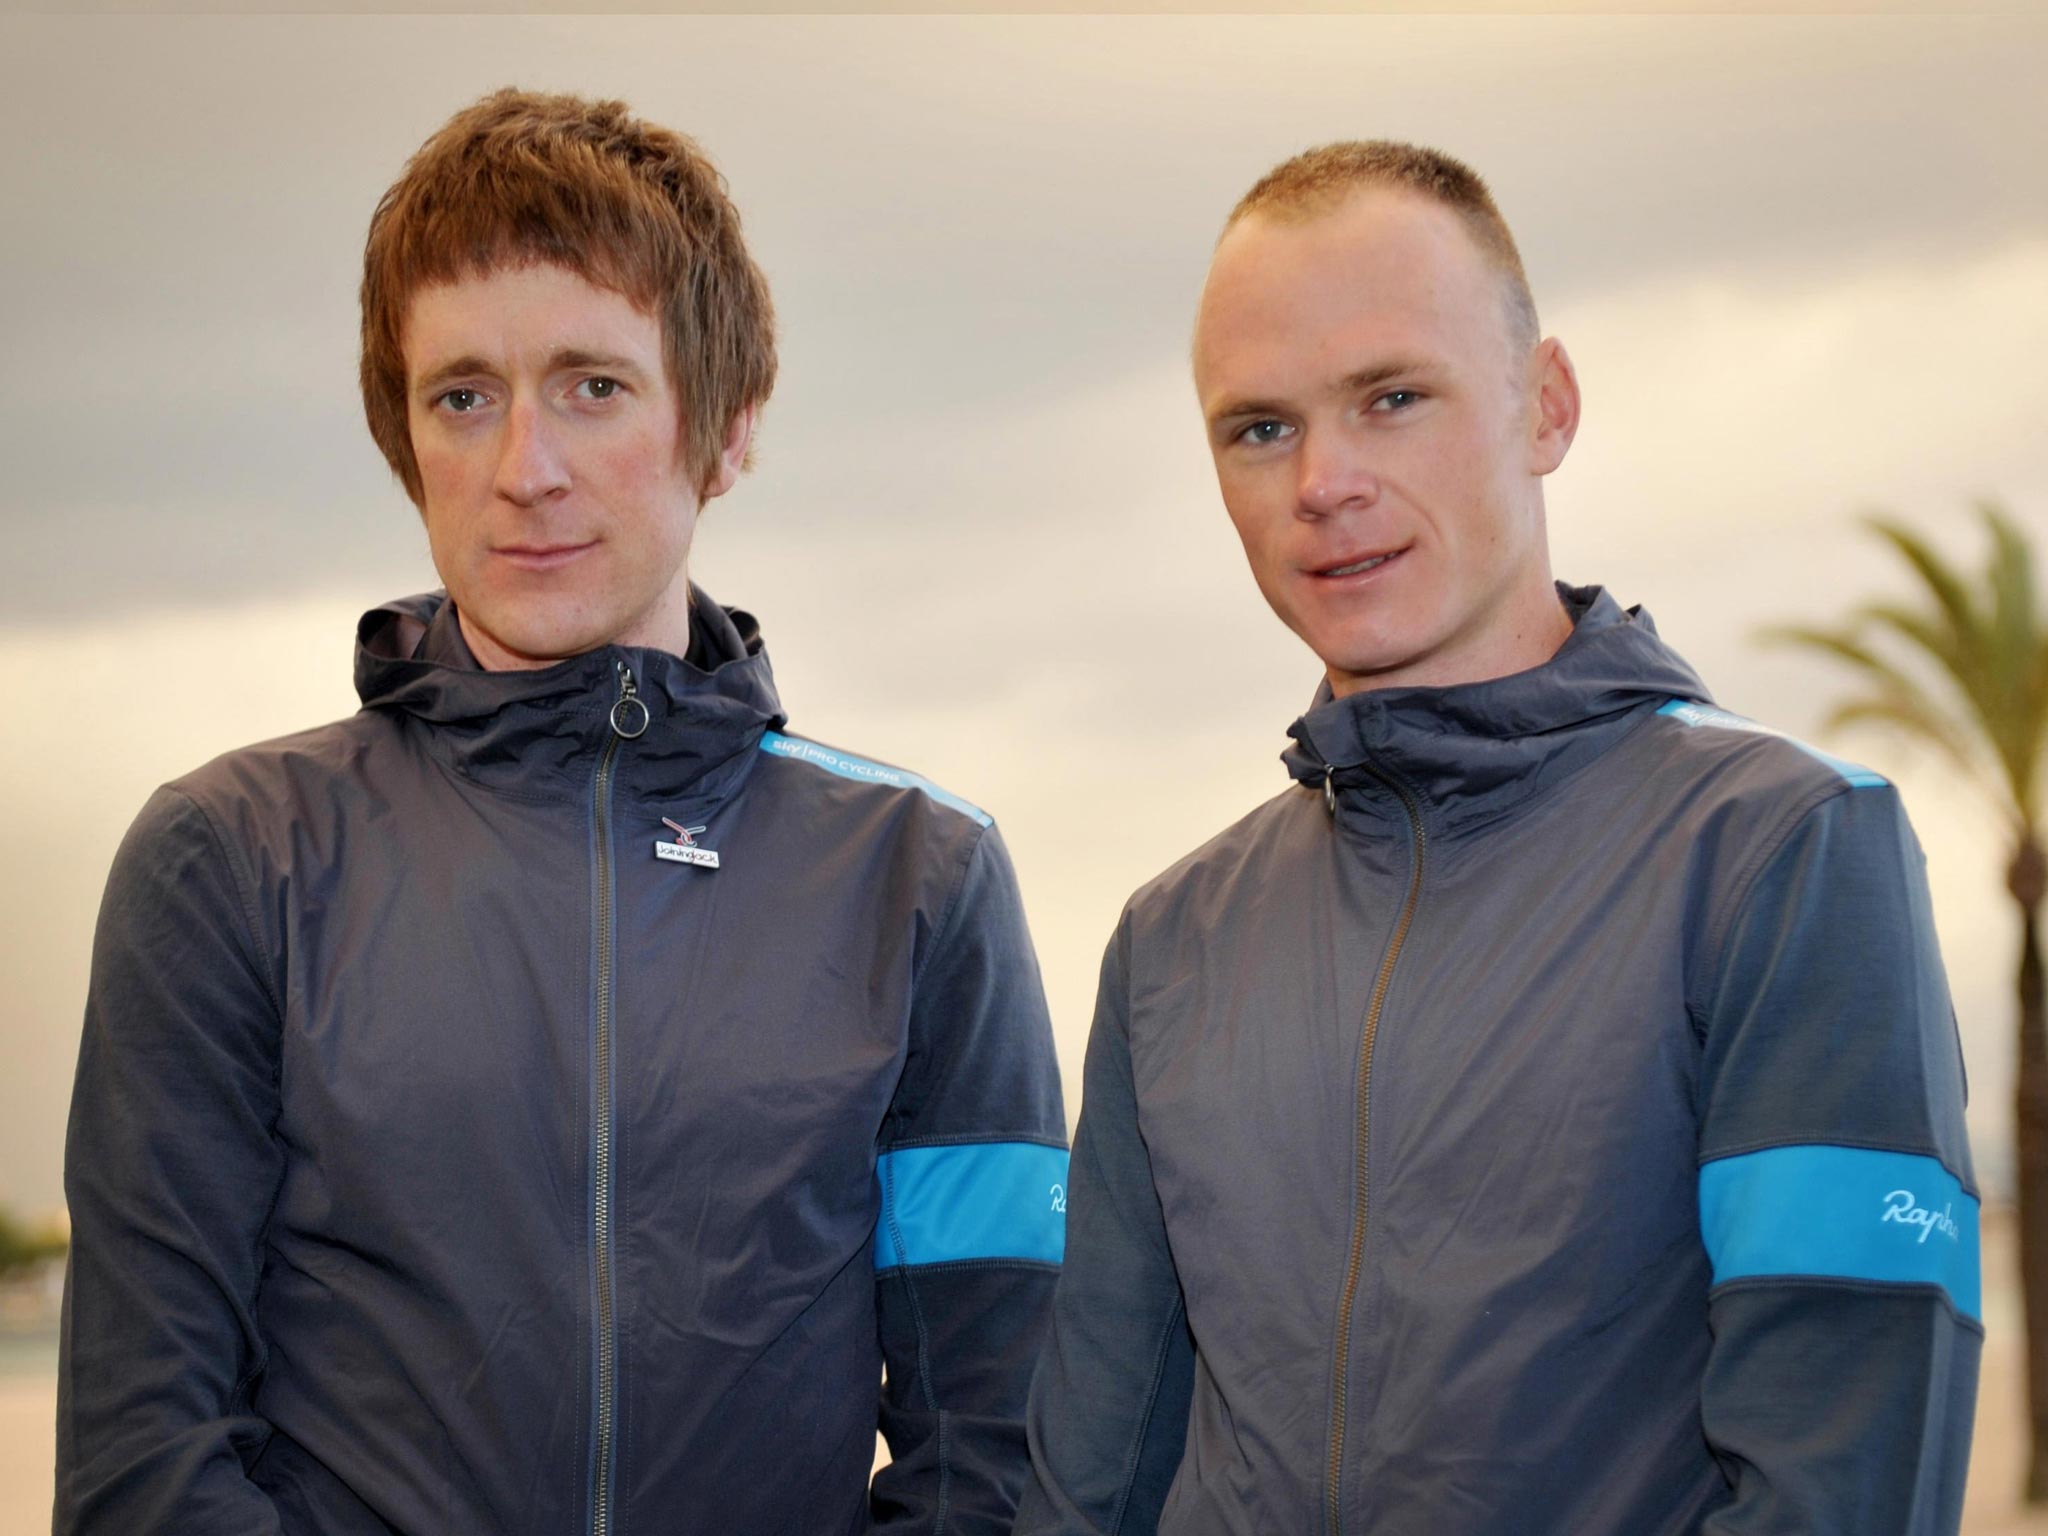 Froome supported Wiggins in his win, but appeared to disobey orders when he pulled away on stage 11